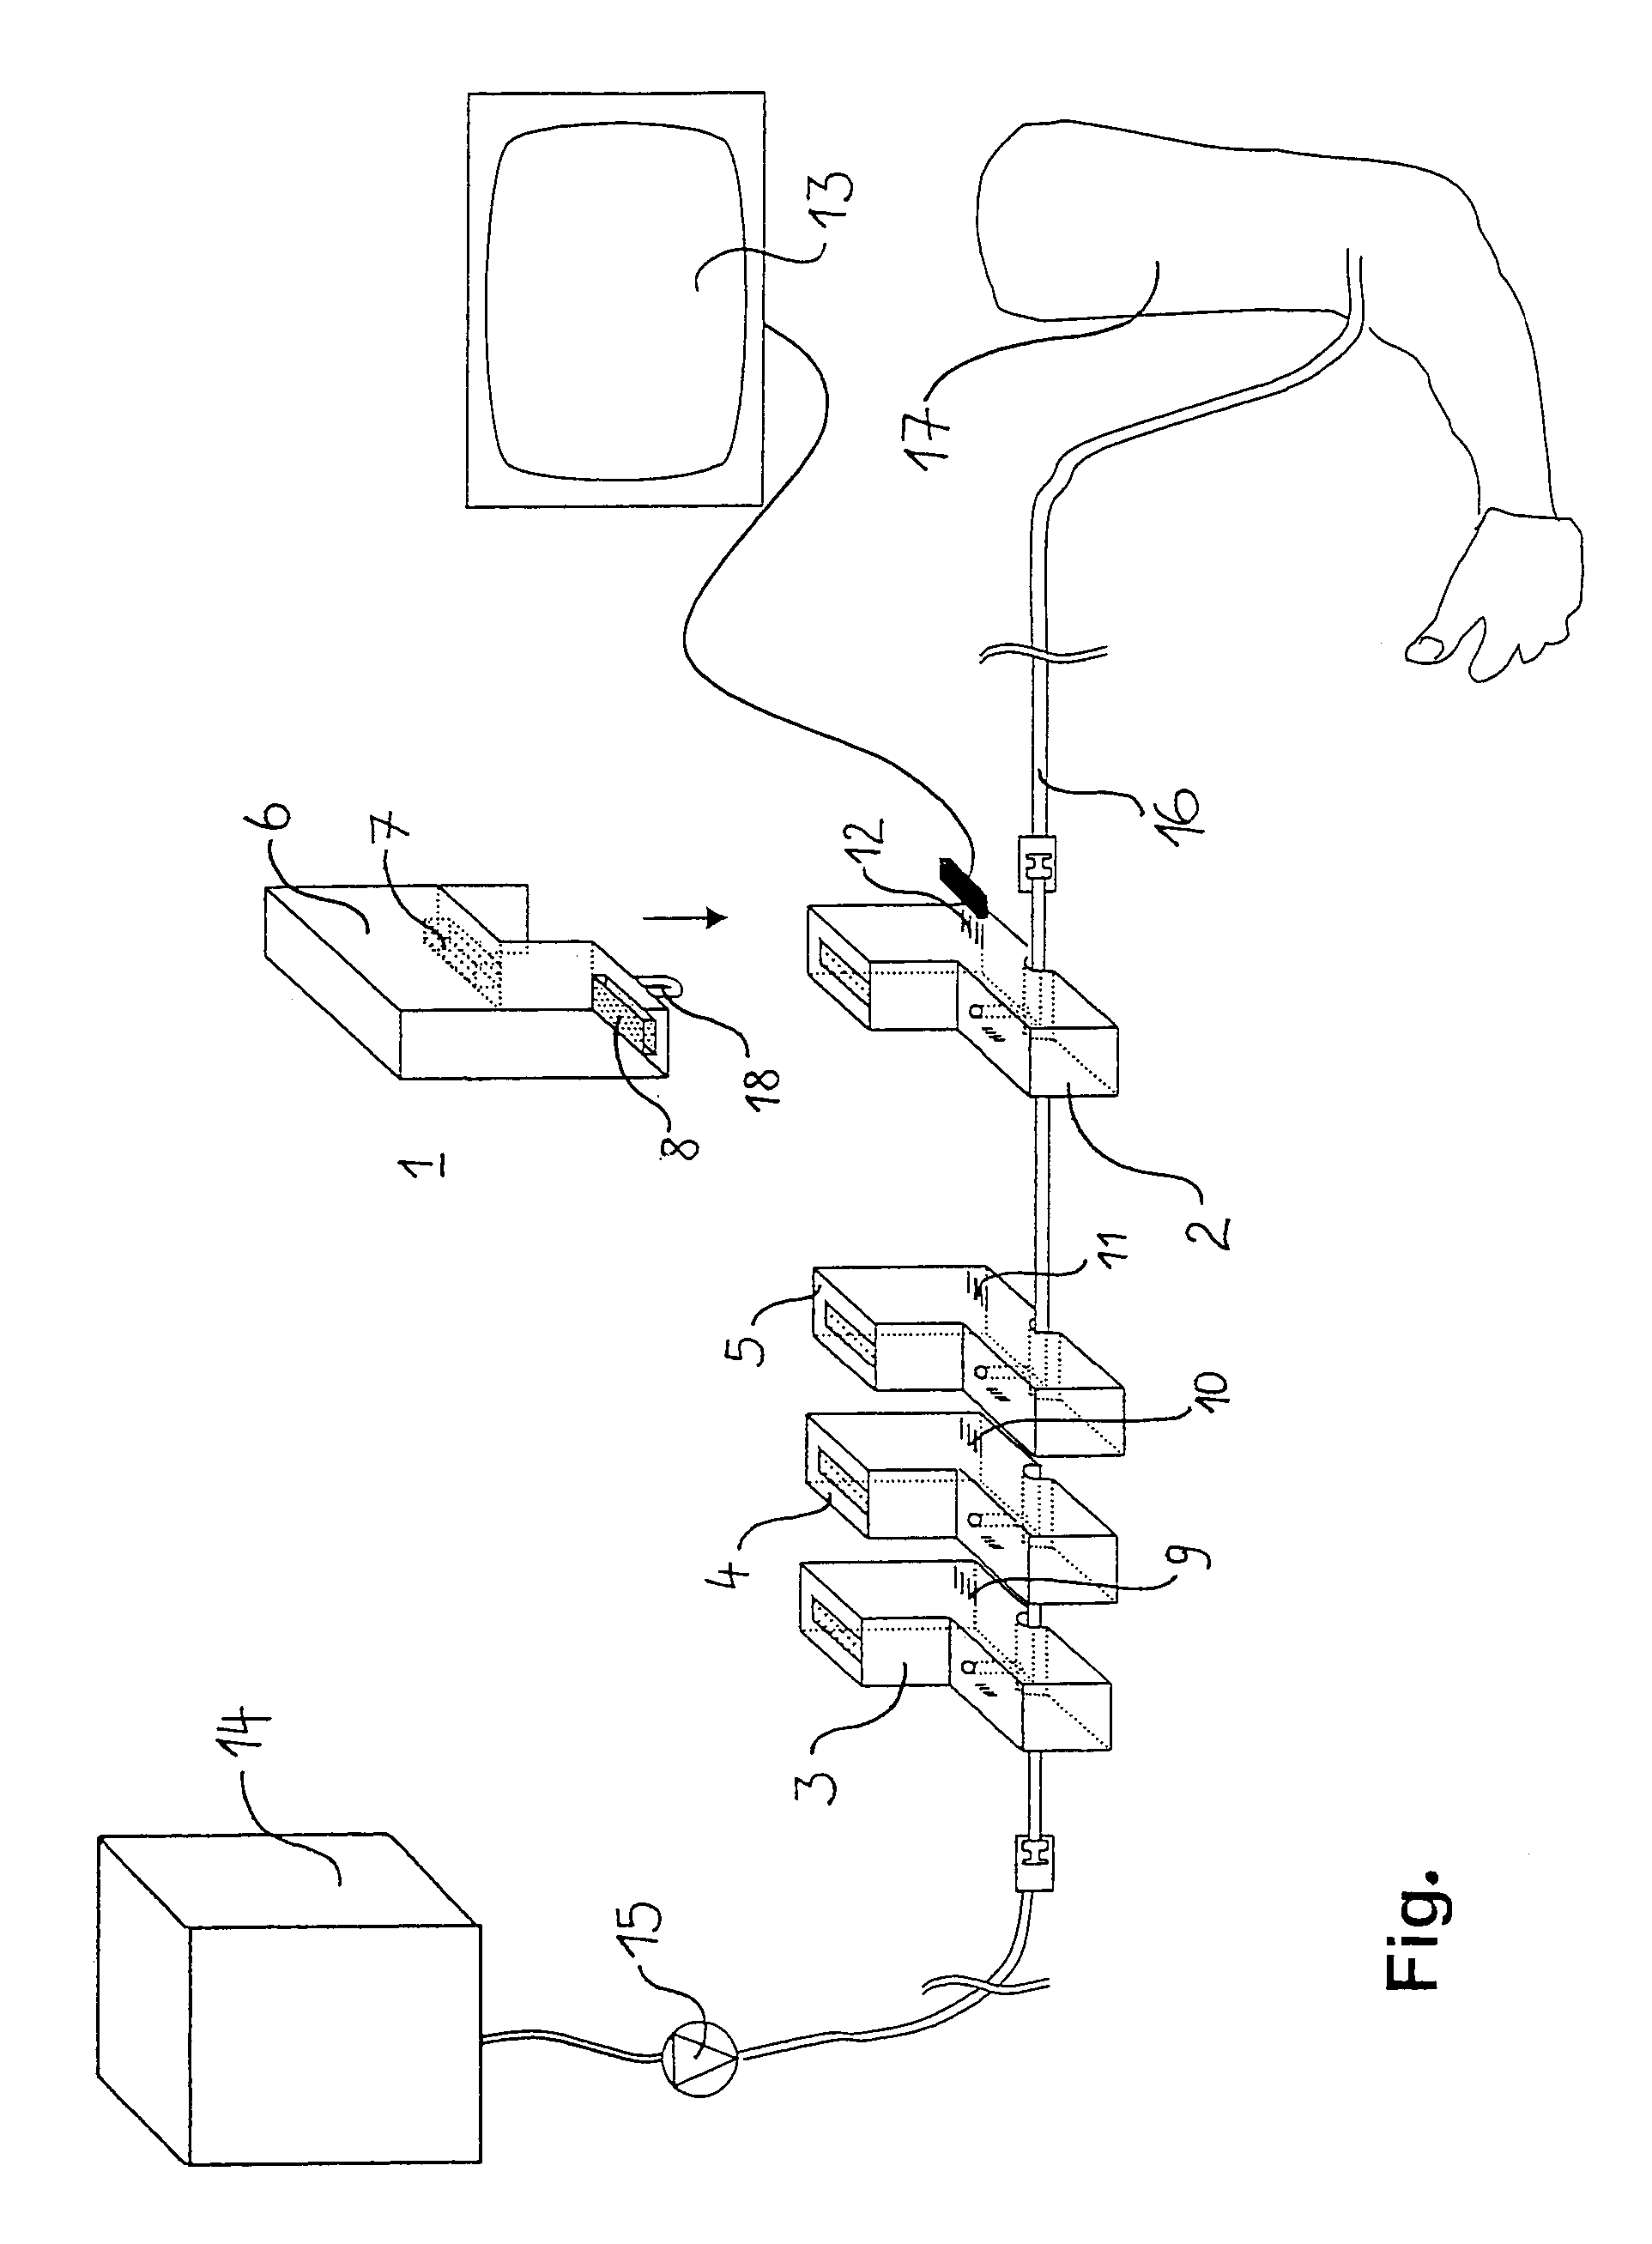 Device for dispensing medical active ingredients